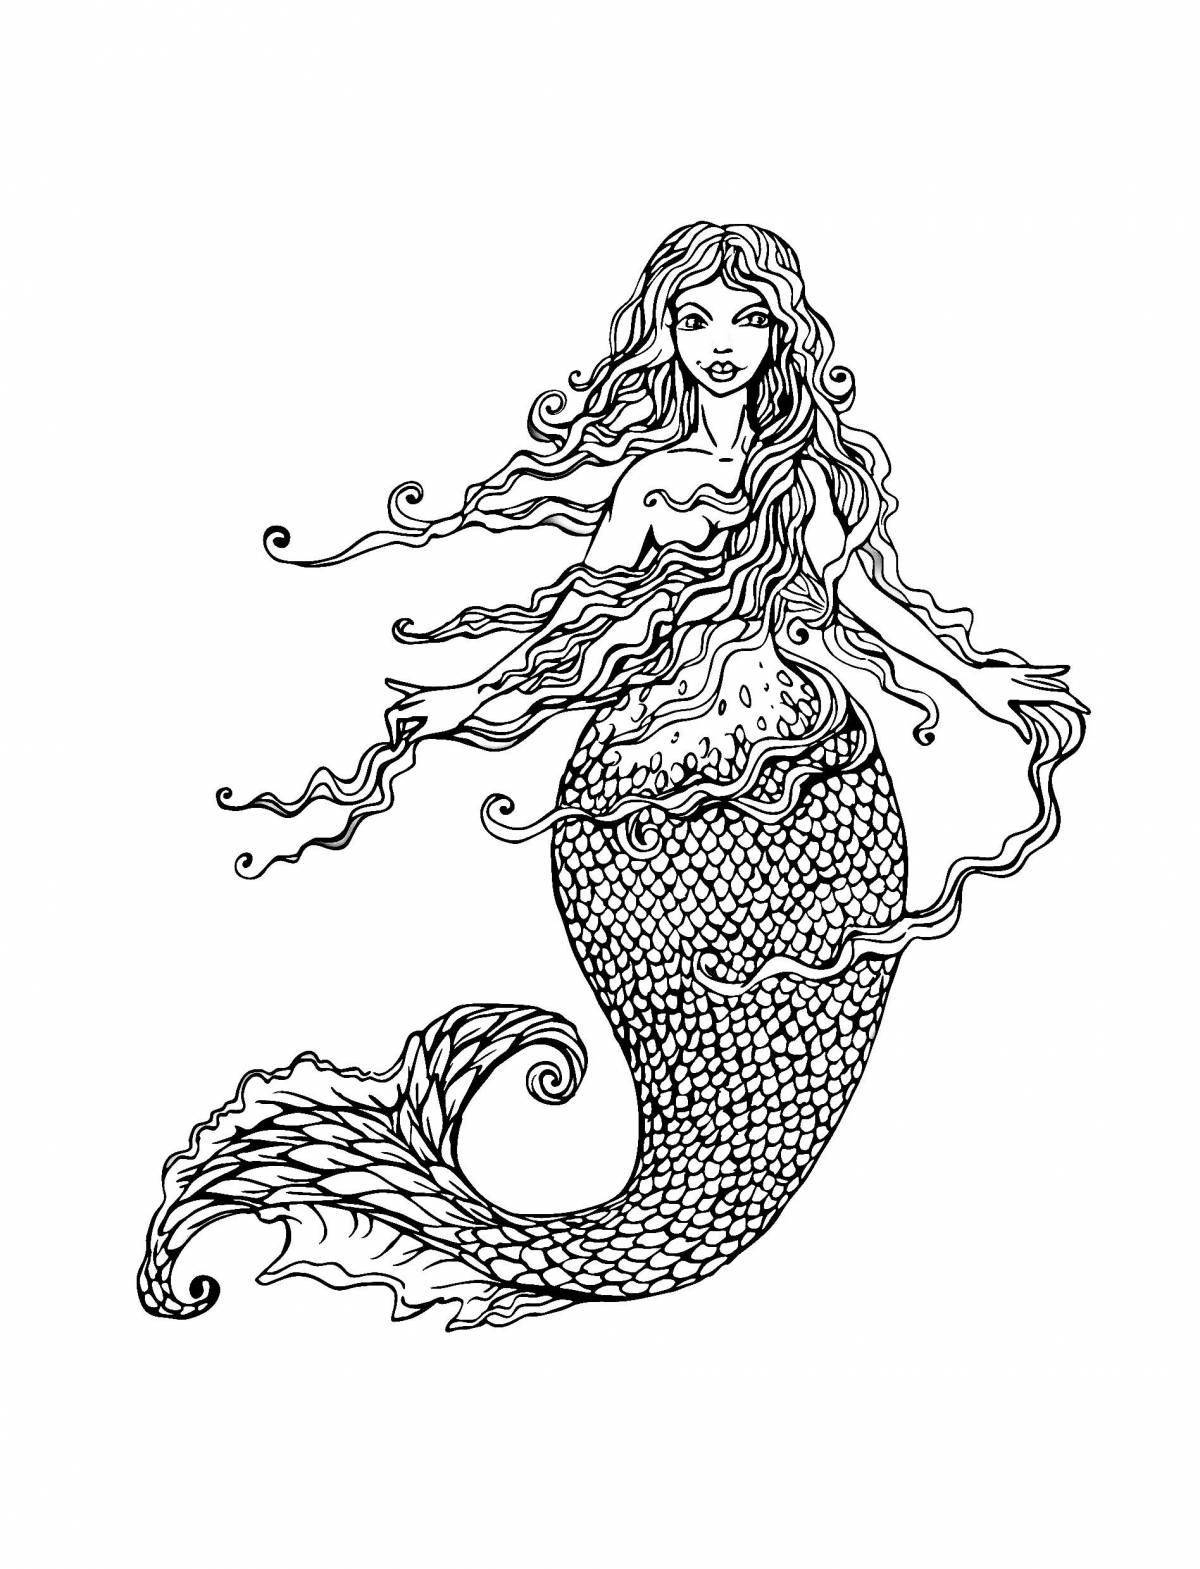 Refreshing mermaid queen coloring page